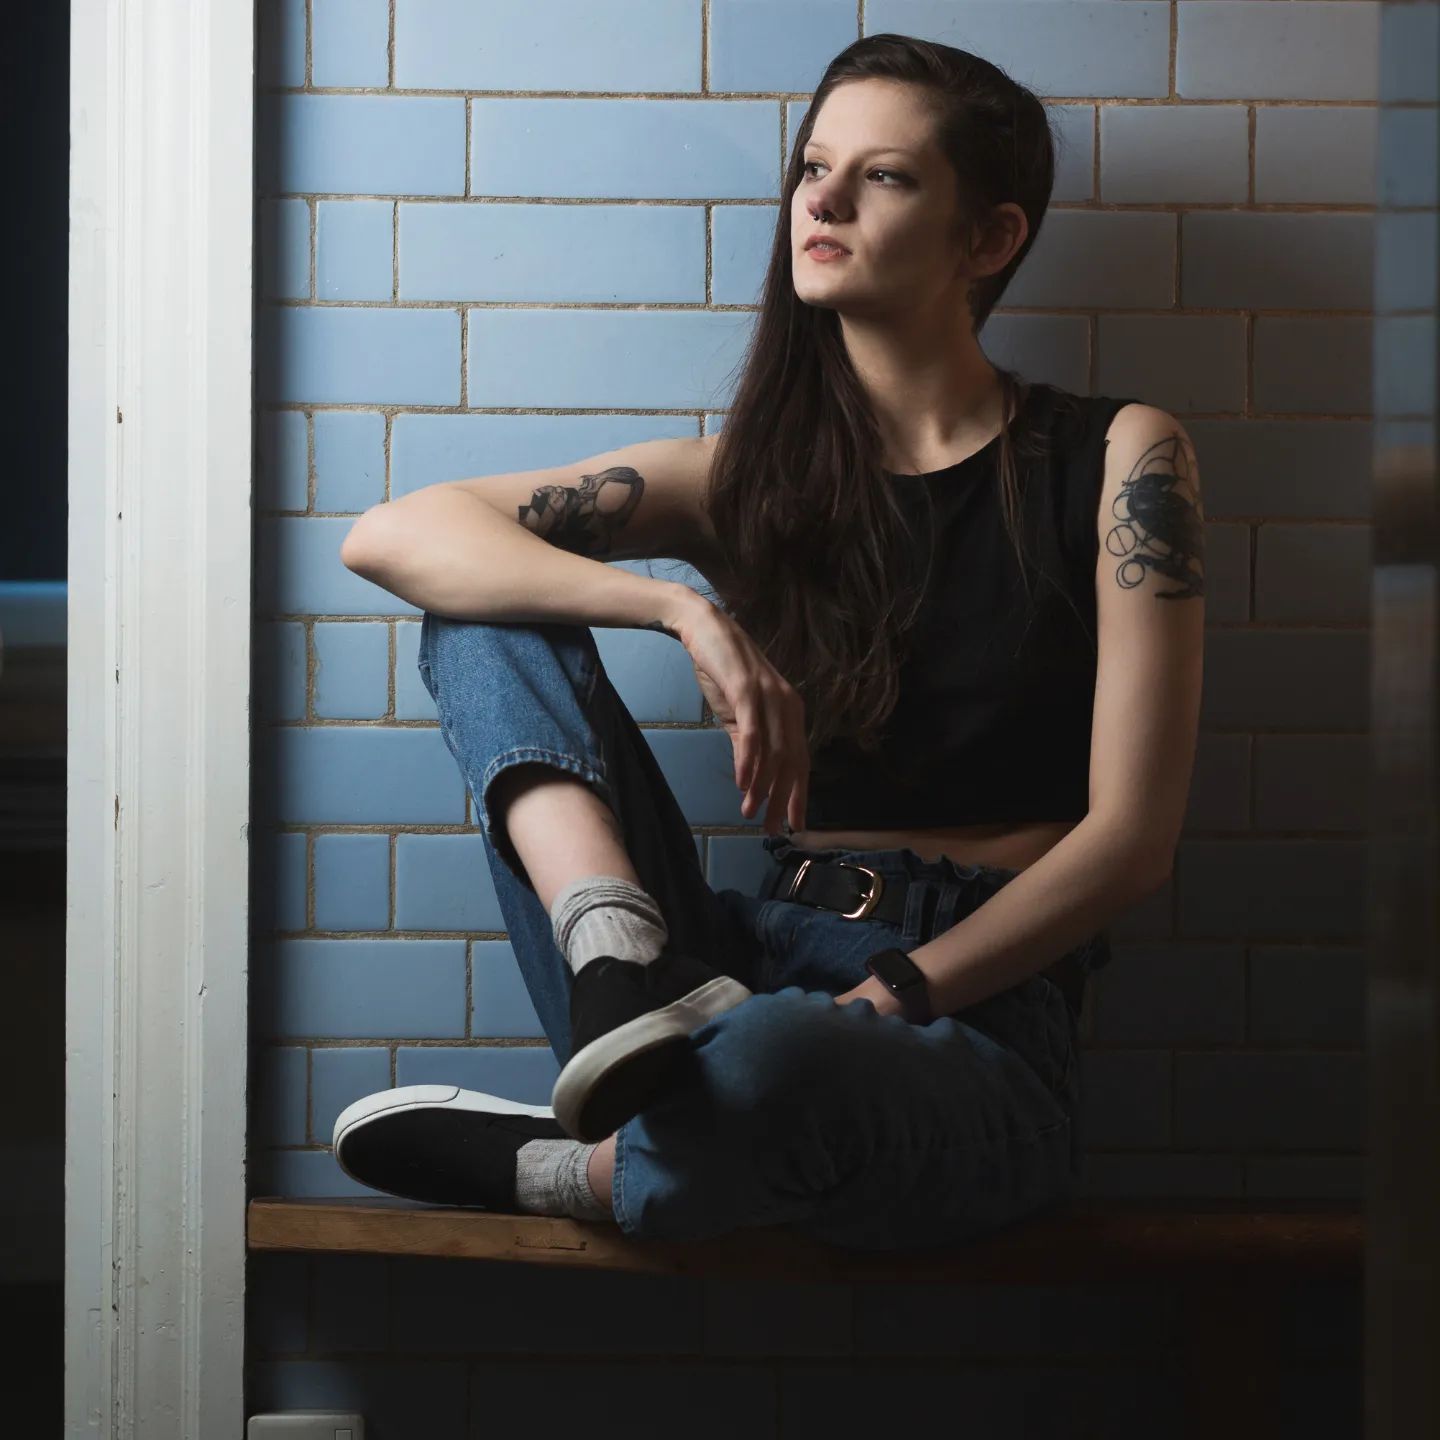 Tattoos and tiles 

📸 @foyers.photography 
🗺️ @eastcoast_creatives March meet

#inkedmodel #simplicity #everydayoutfit #keepitsimple #tiledwall #beautiful #jeans #blackinktattoo #paleskinbeauties #ukmodel #daytodaybeauty #morrígansraven #ec_creatives #relax #queergirls